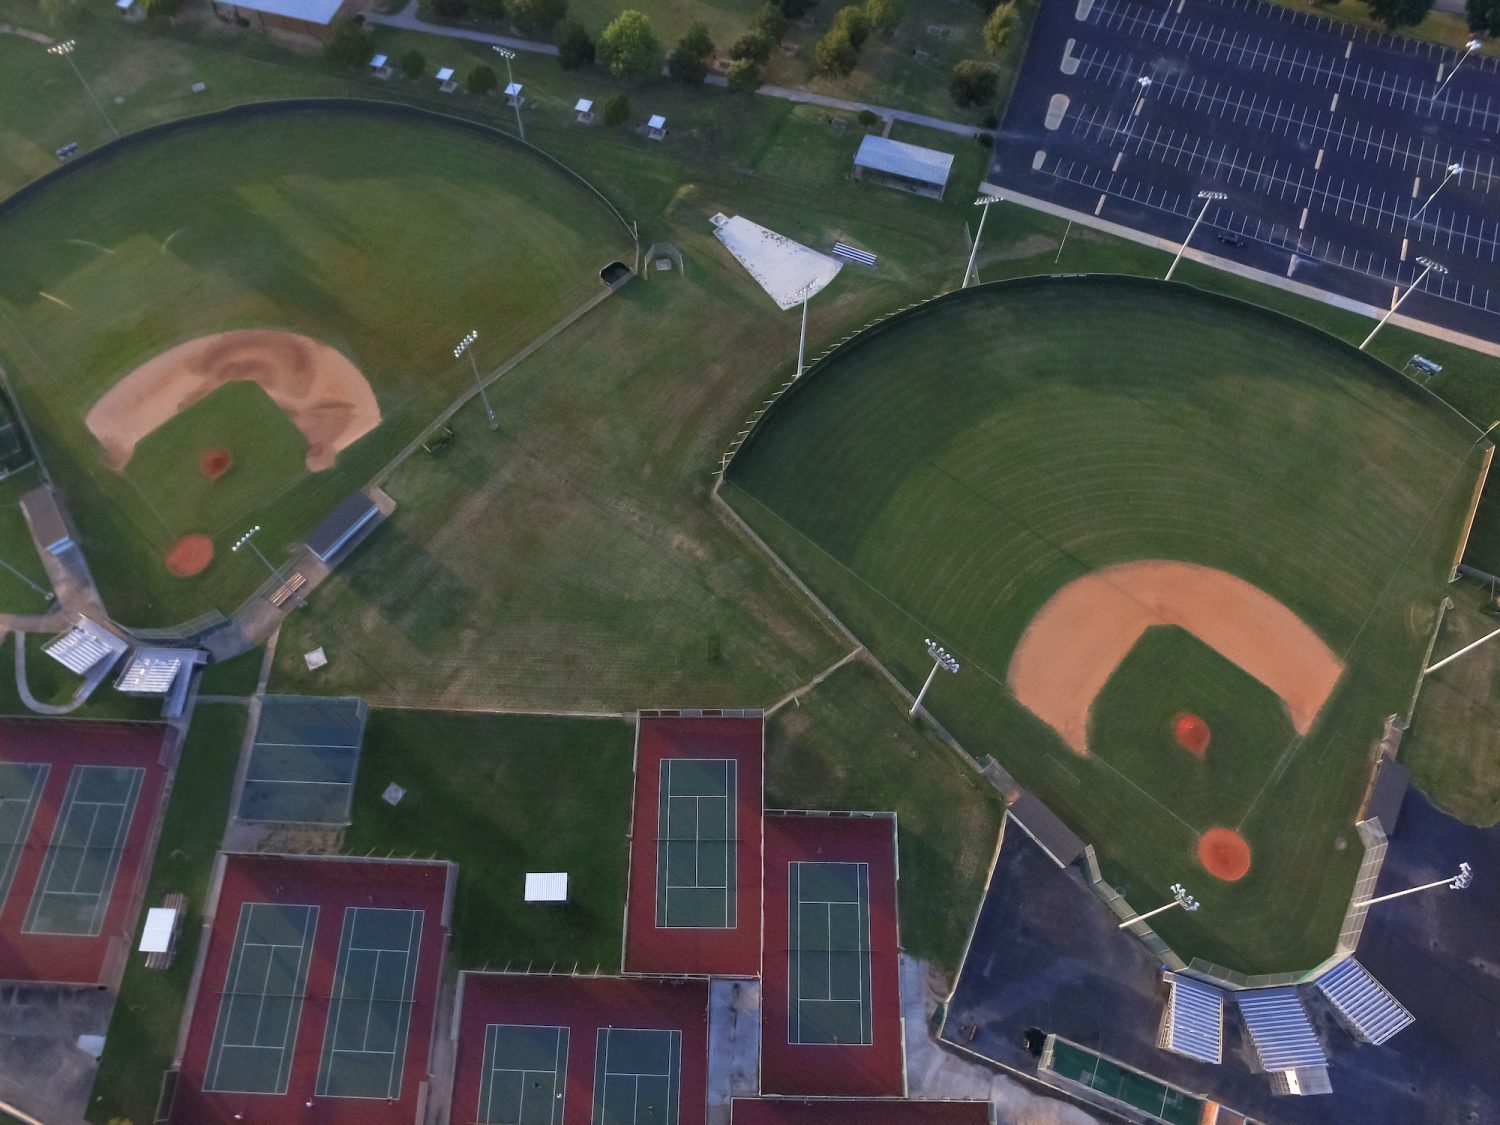 Aerial outdoor tennis court in an athletic complex at Houston, Texas, USA at sunset. Available are baseball fields and parking lots. Urban community athletics program and recreation concept.